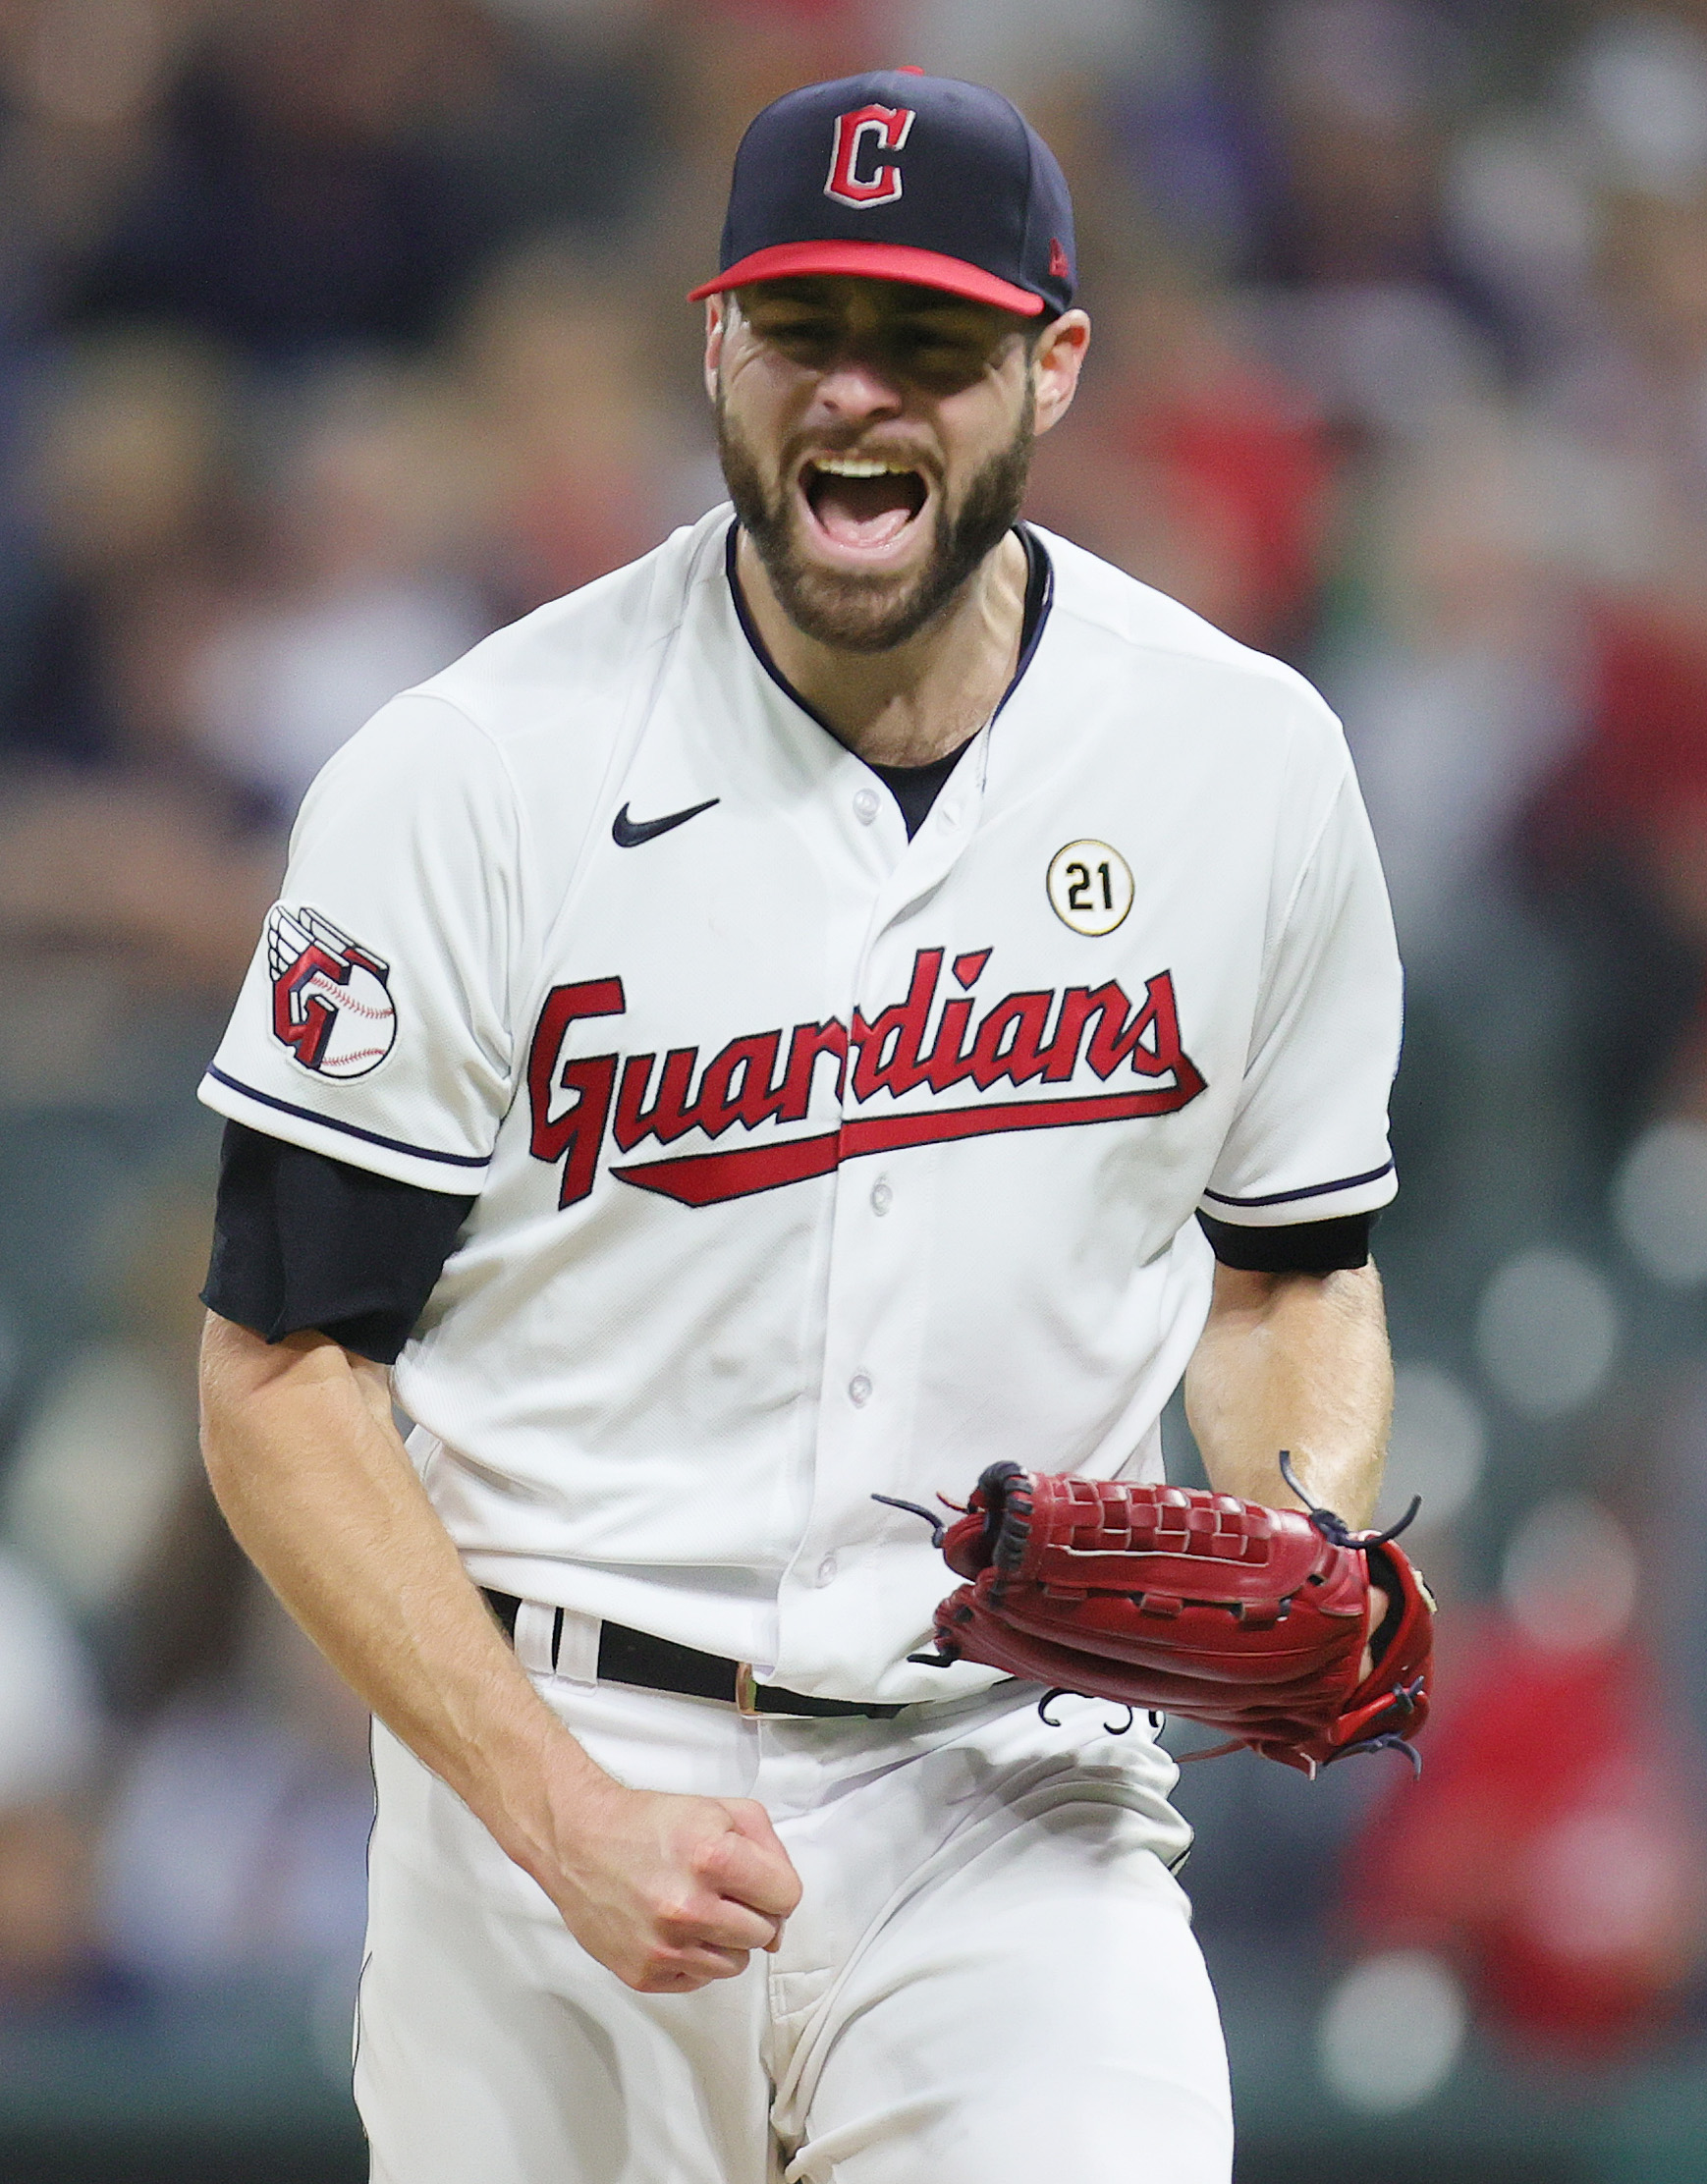 Giolito strikes out season-high 12 for Cleveland in 12-3 win over Texas